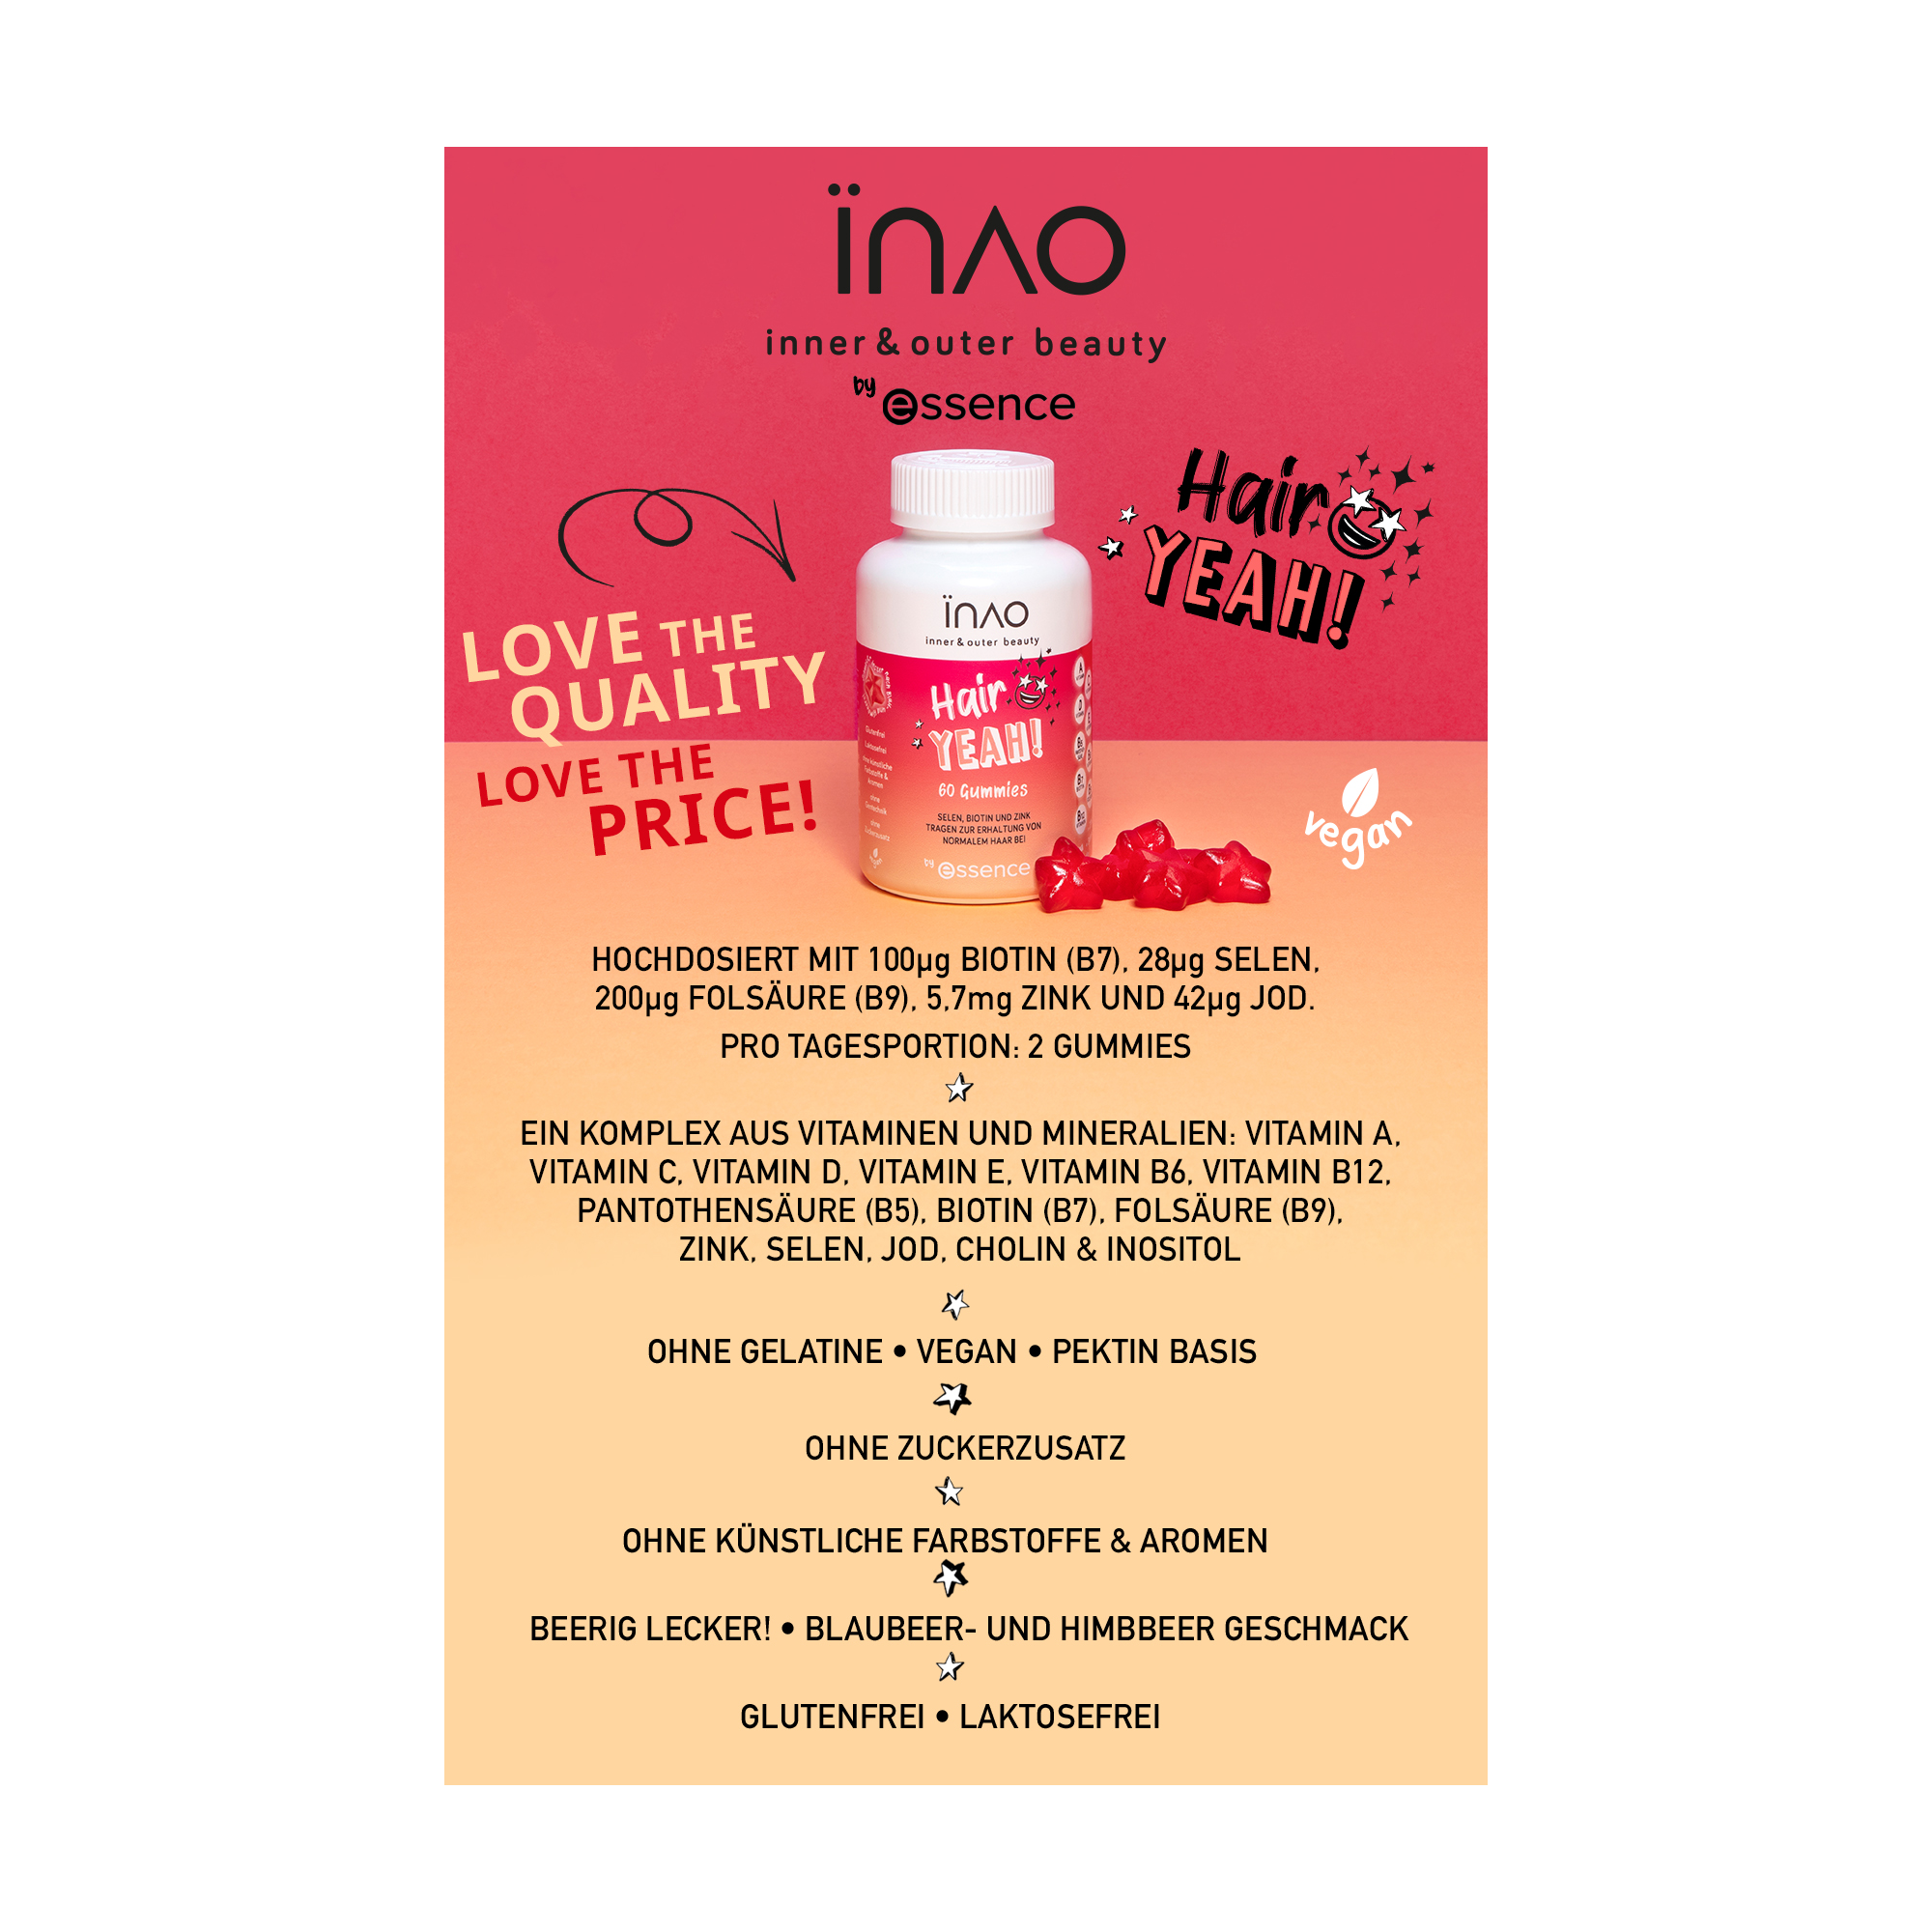 INAO inner and outer beauty Hair YEAH! gummies by essence